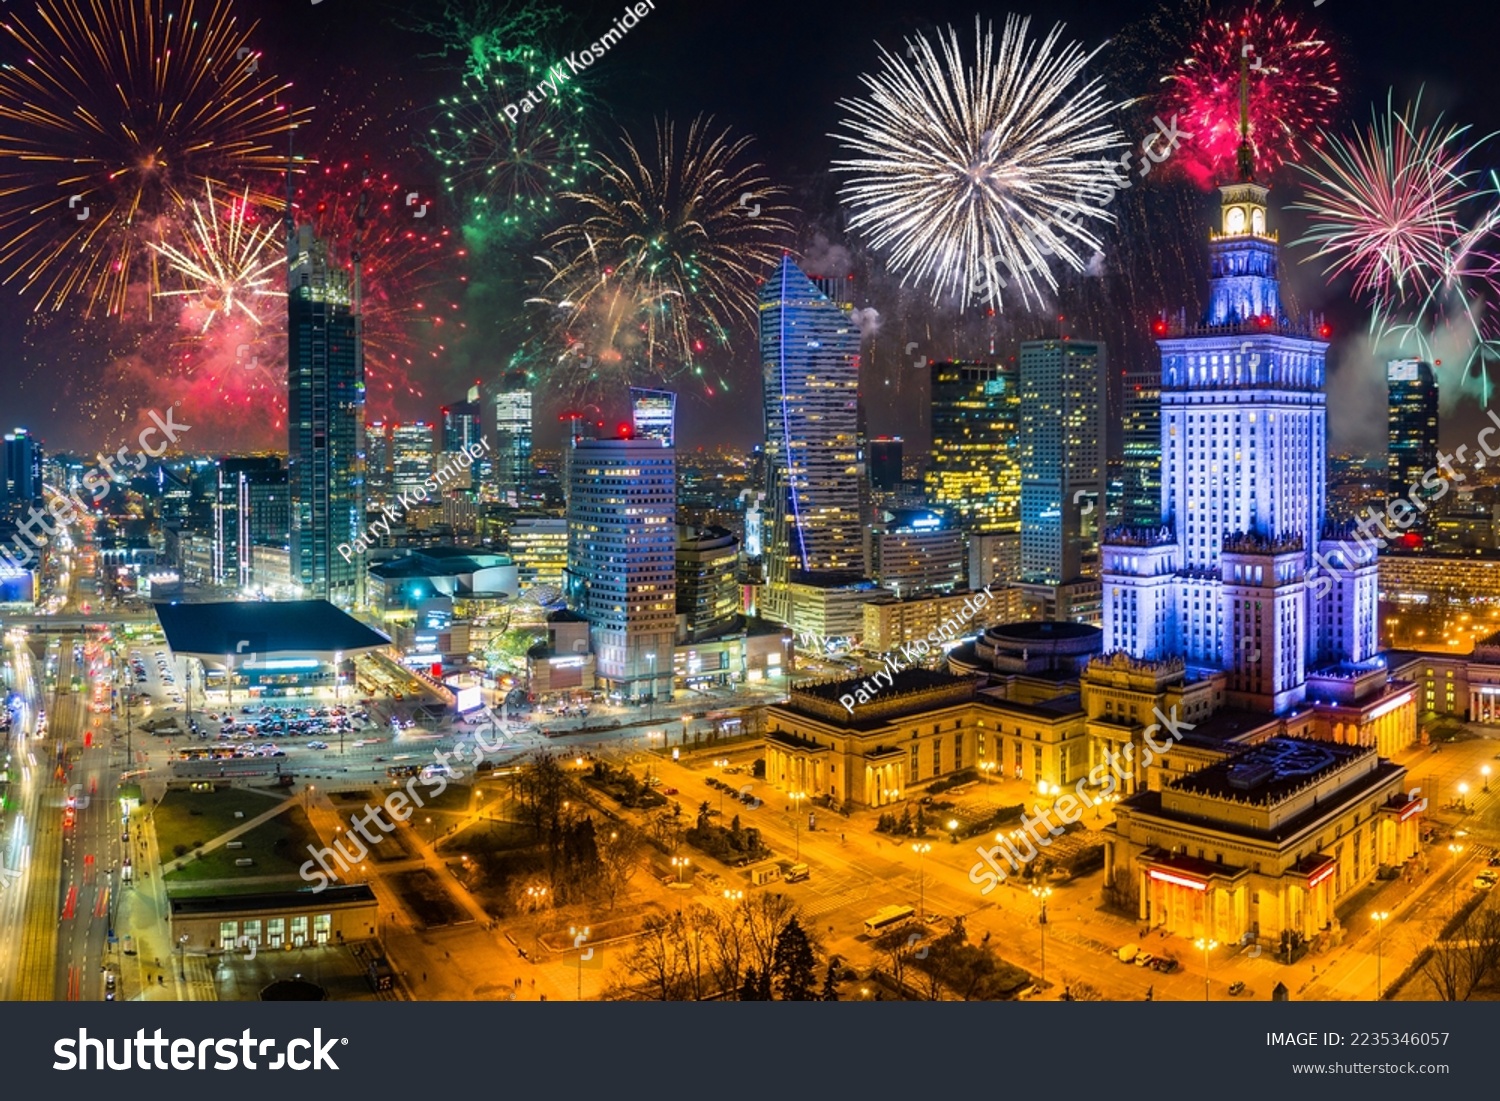 New Year fireworks display in Warsaw, Poland #2235346057